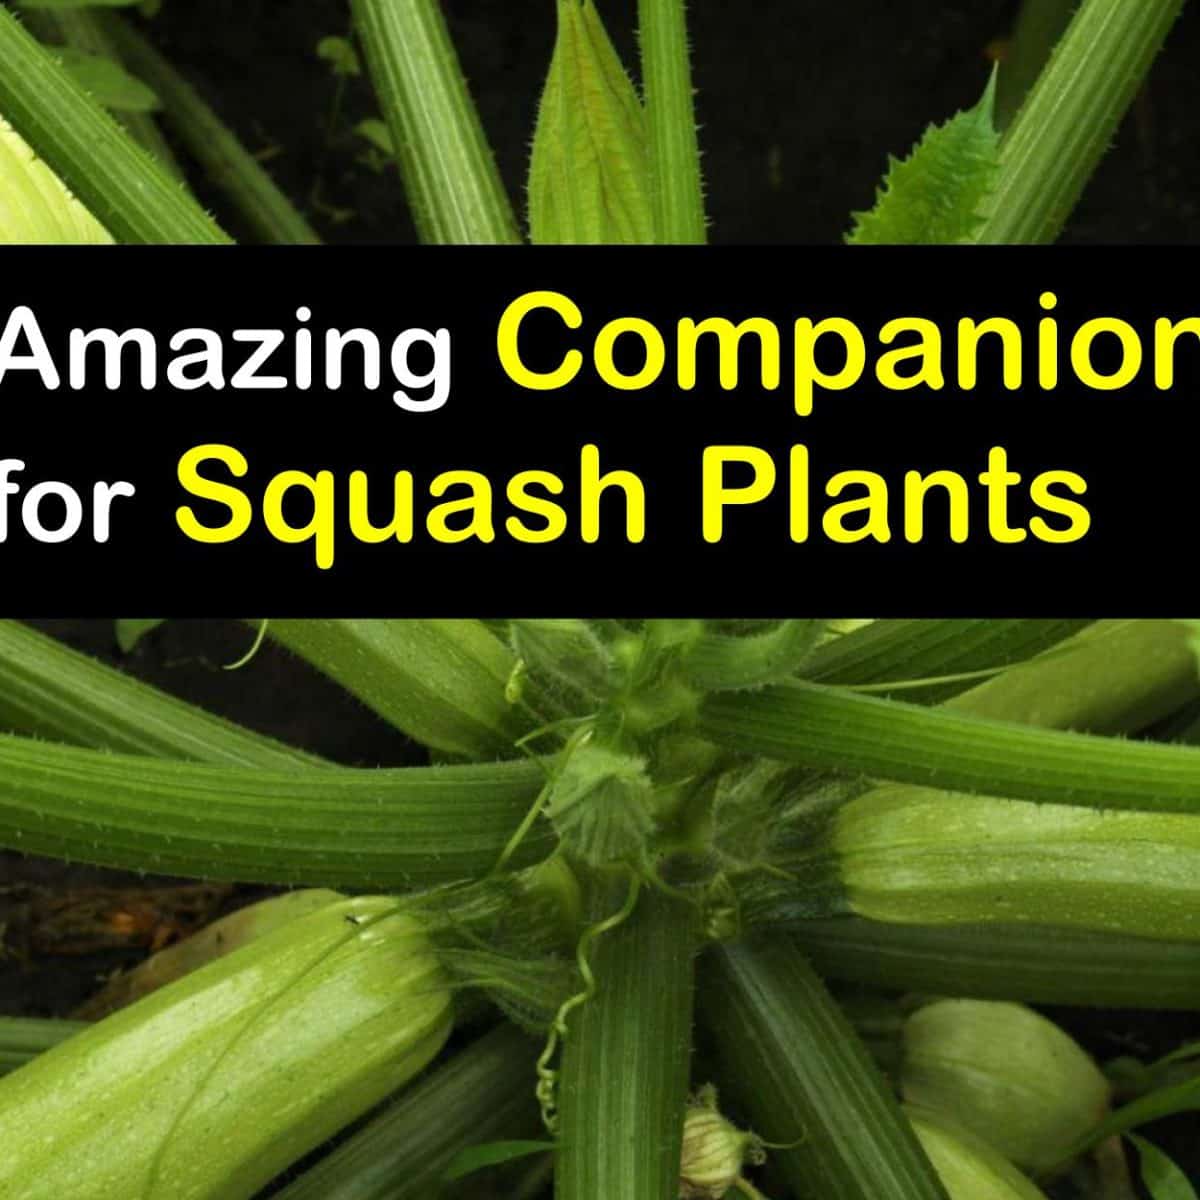 Image of Butternut squash and radishes companion planting